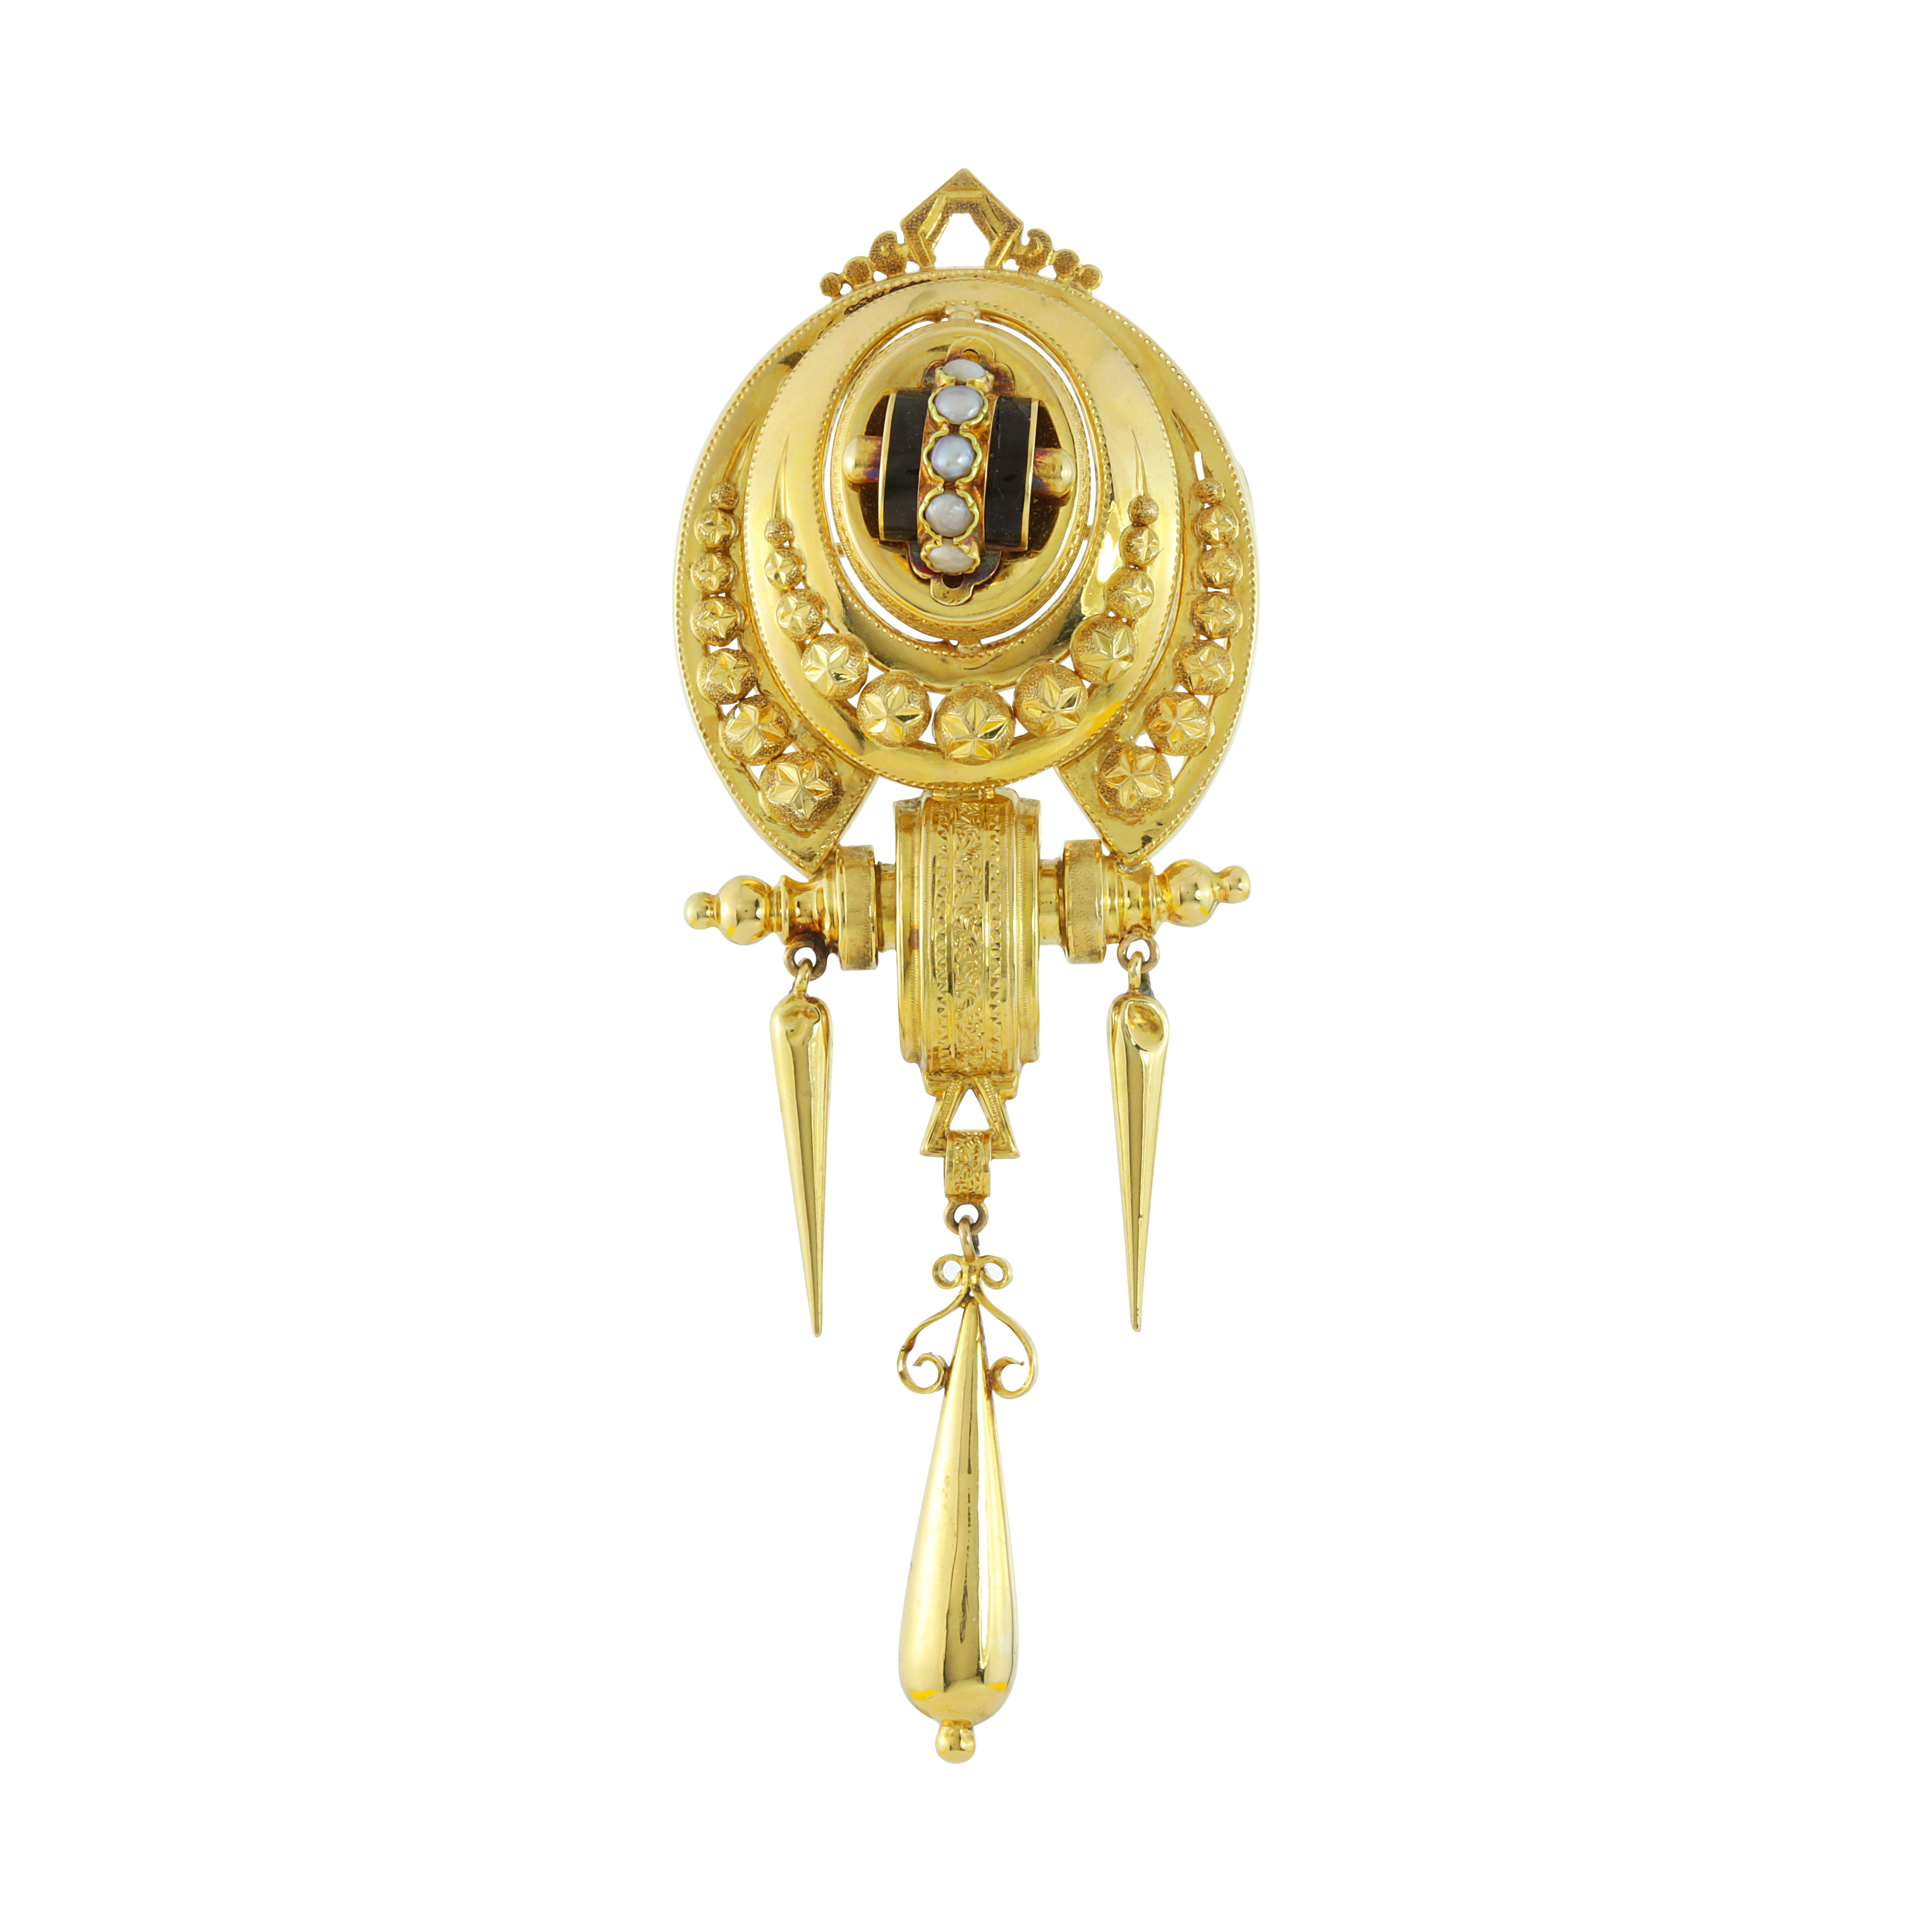 AN ANTIQUE PEARL AND ENAMEL BROOCH, SWEDISH CIRCA 1870 in 18ct yellow gold, set with a central pearl